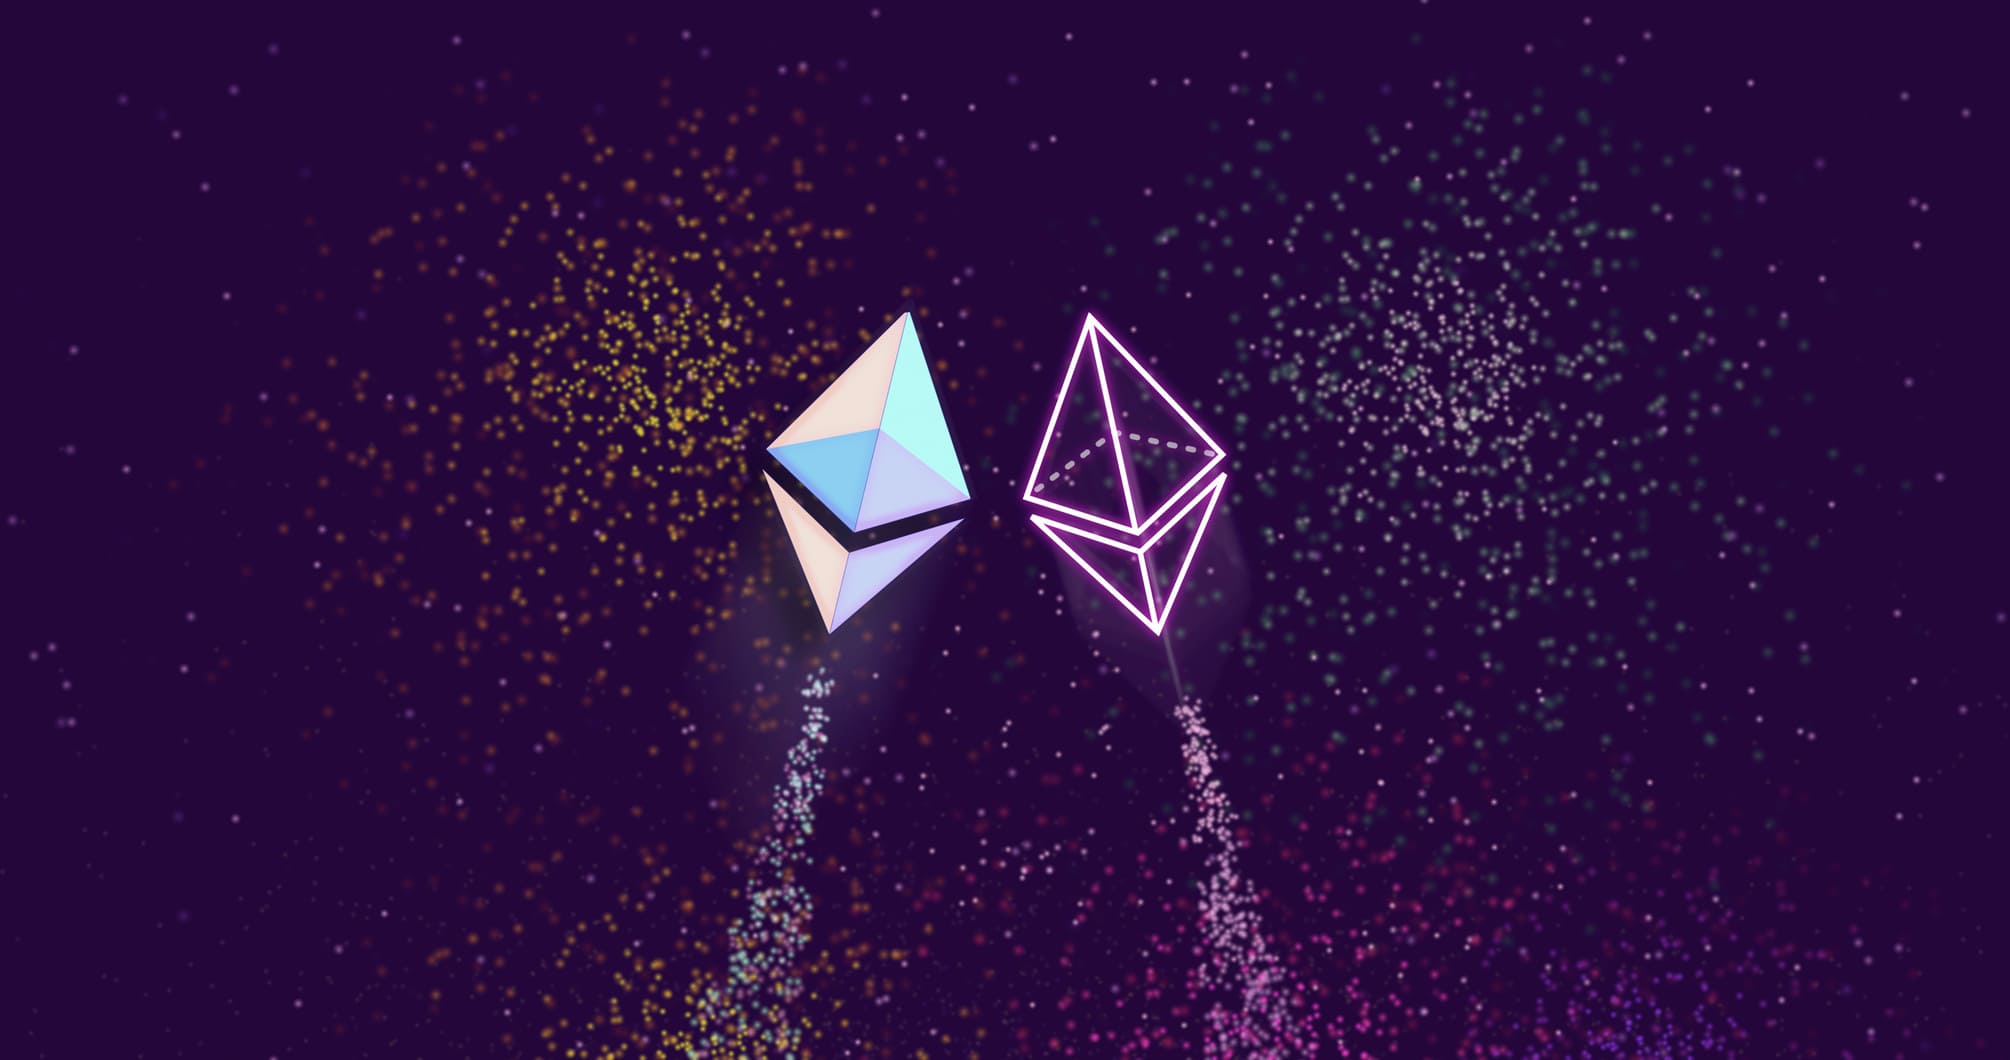 Ethereum’s last PoW and first PoS transaction blocks transformed into NFTs